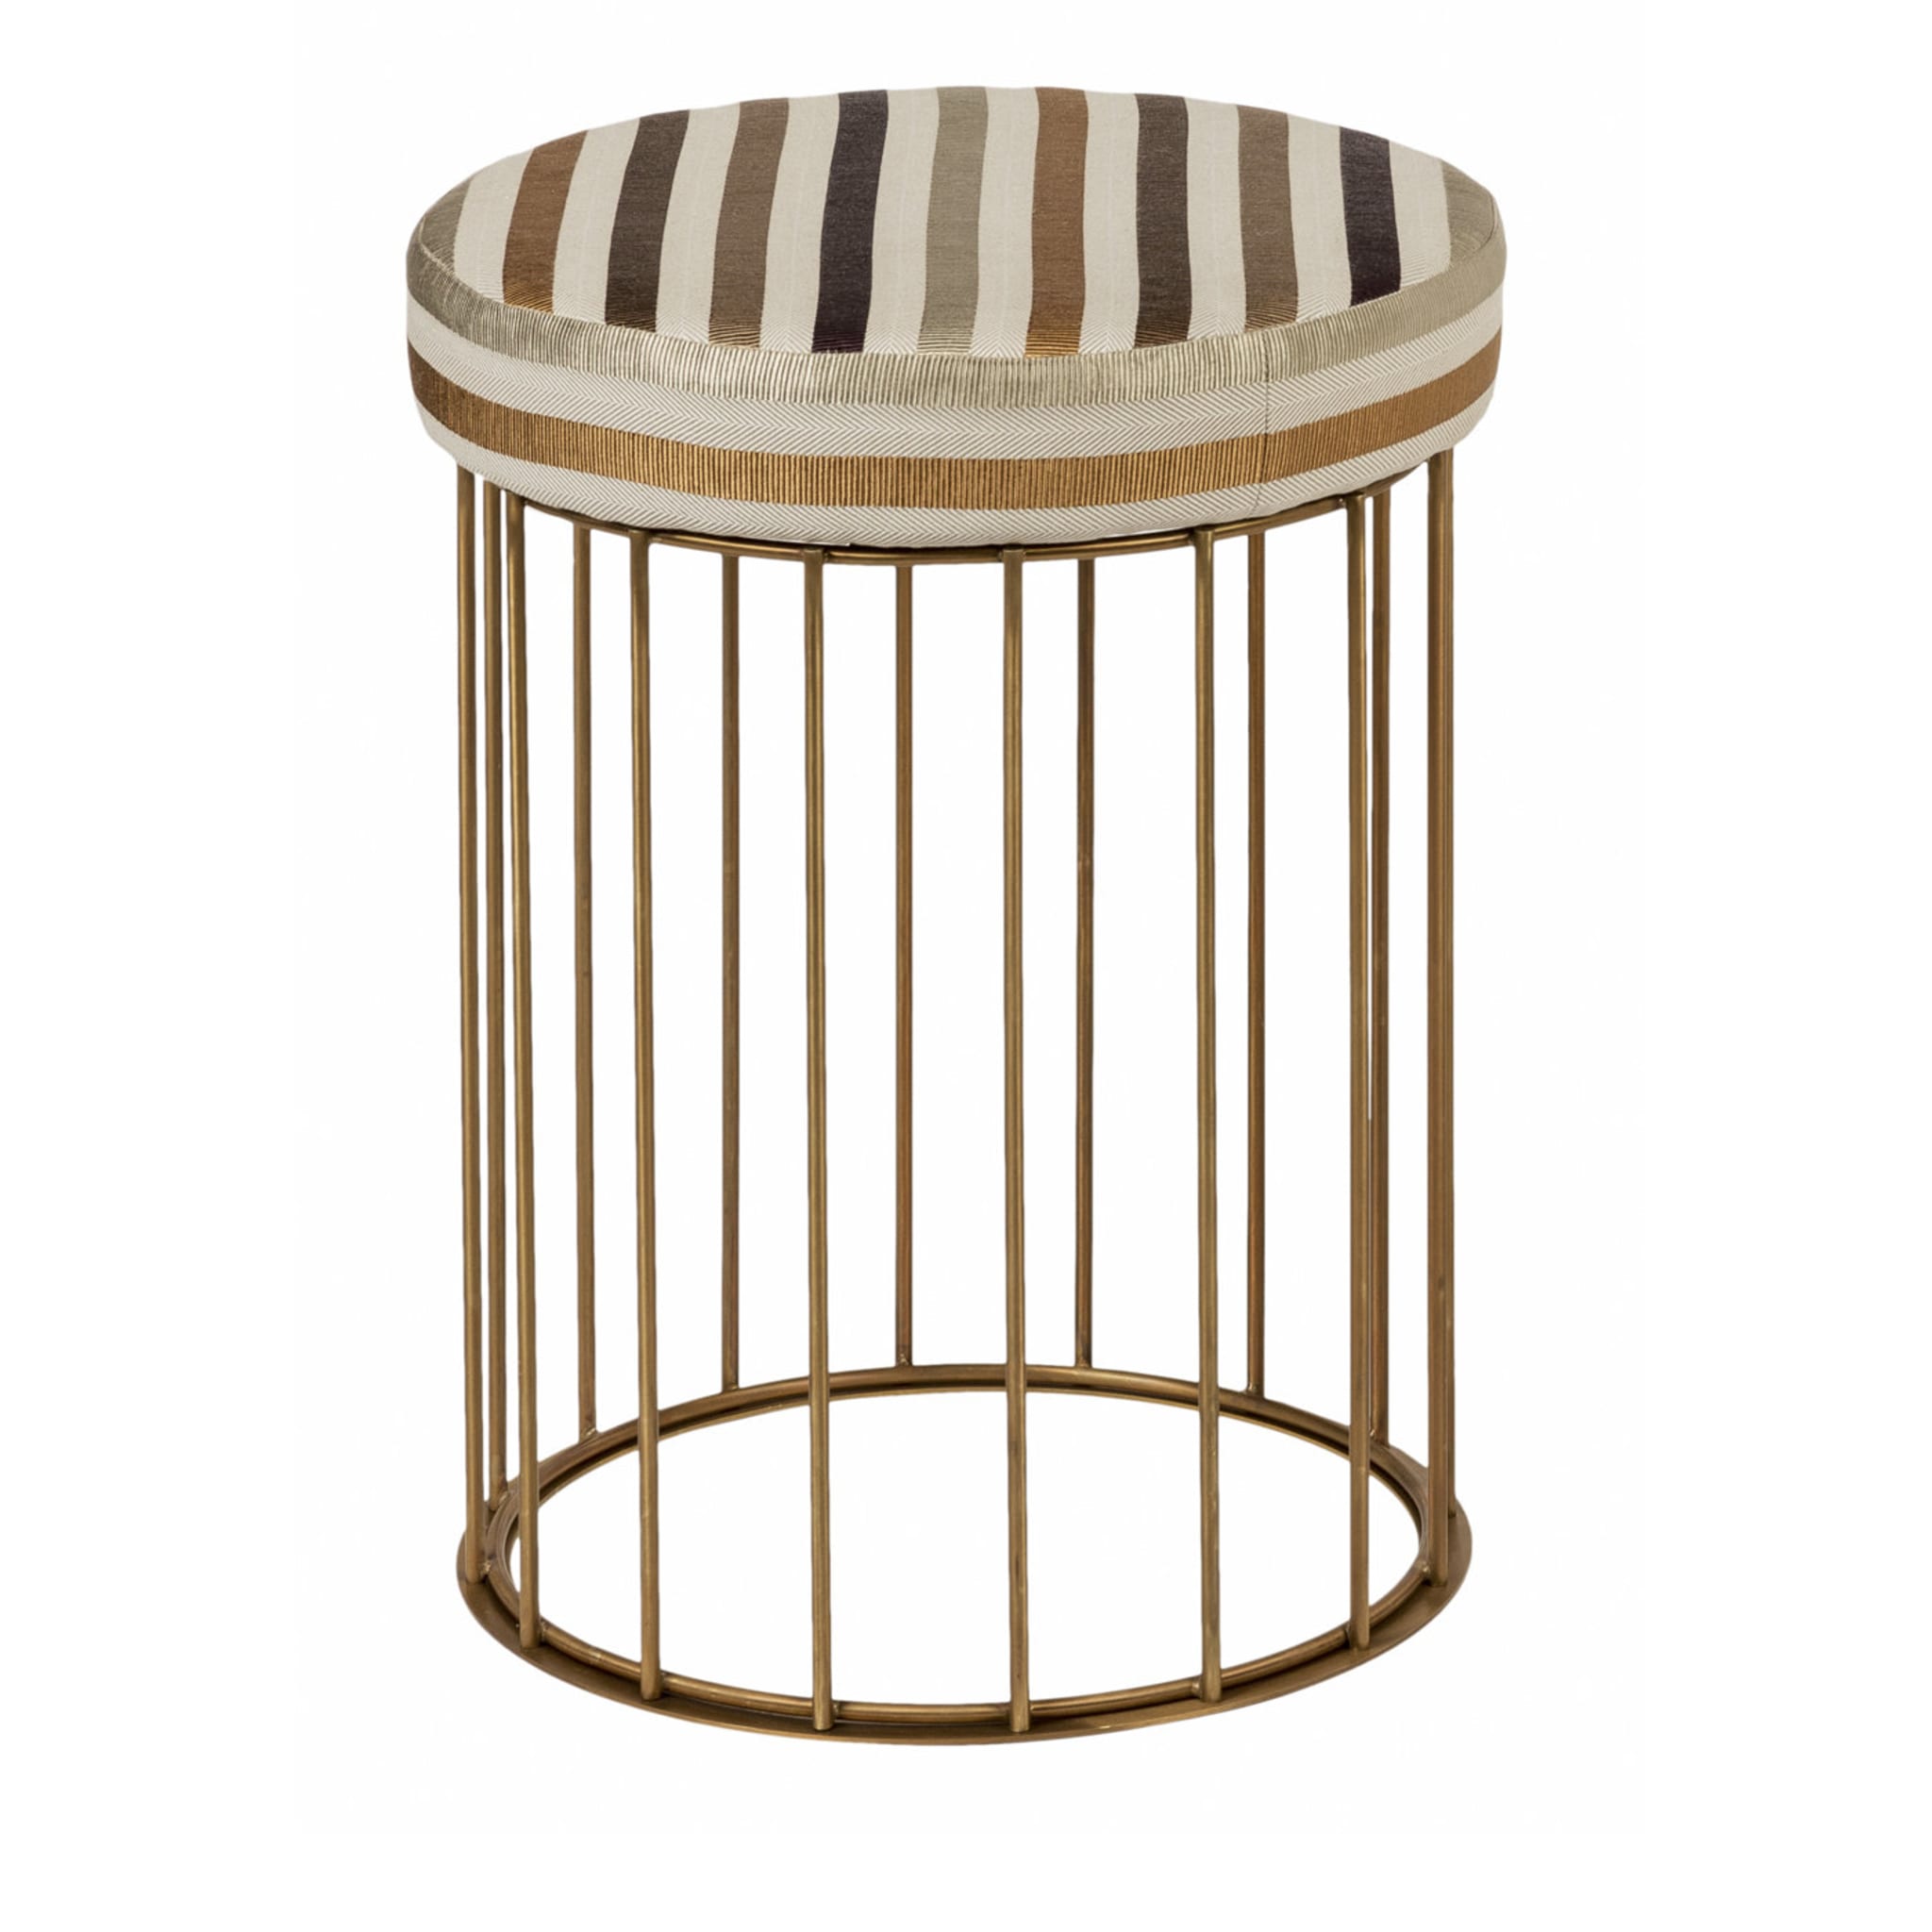 Cage 8 Stool - Main view